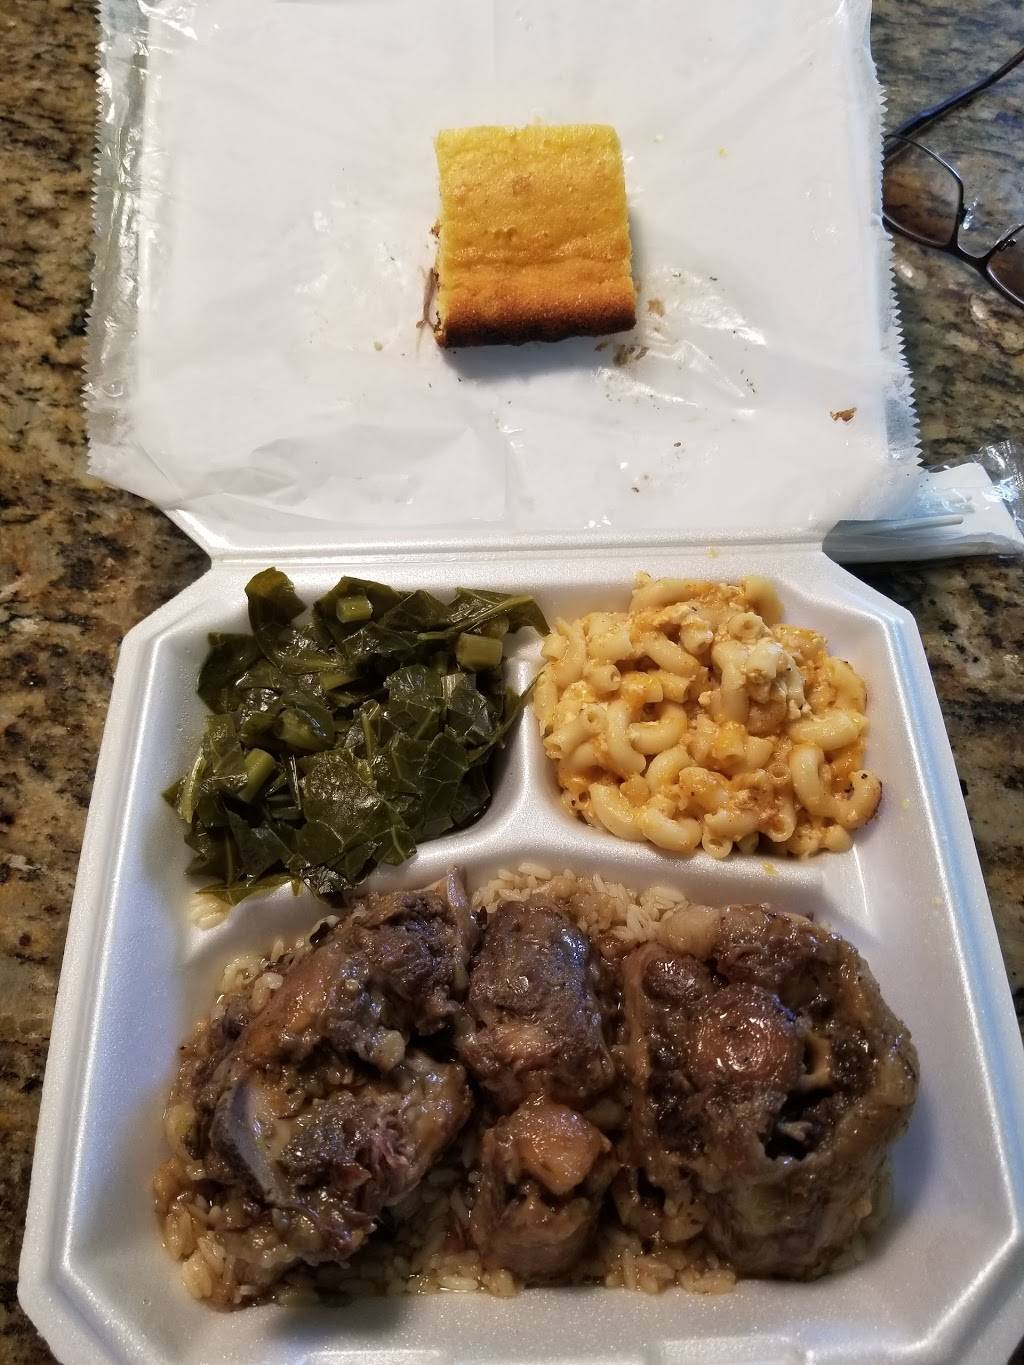 The Waltons Home Cooking & Catering | 1774 Panola Rd, Ellenwood, GA 30294, USA | Phone: (470) 275-5595